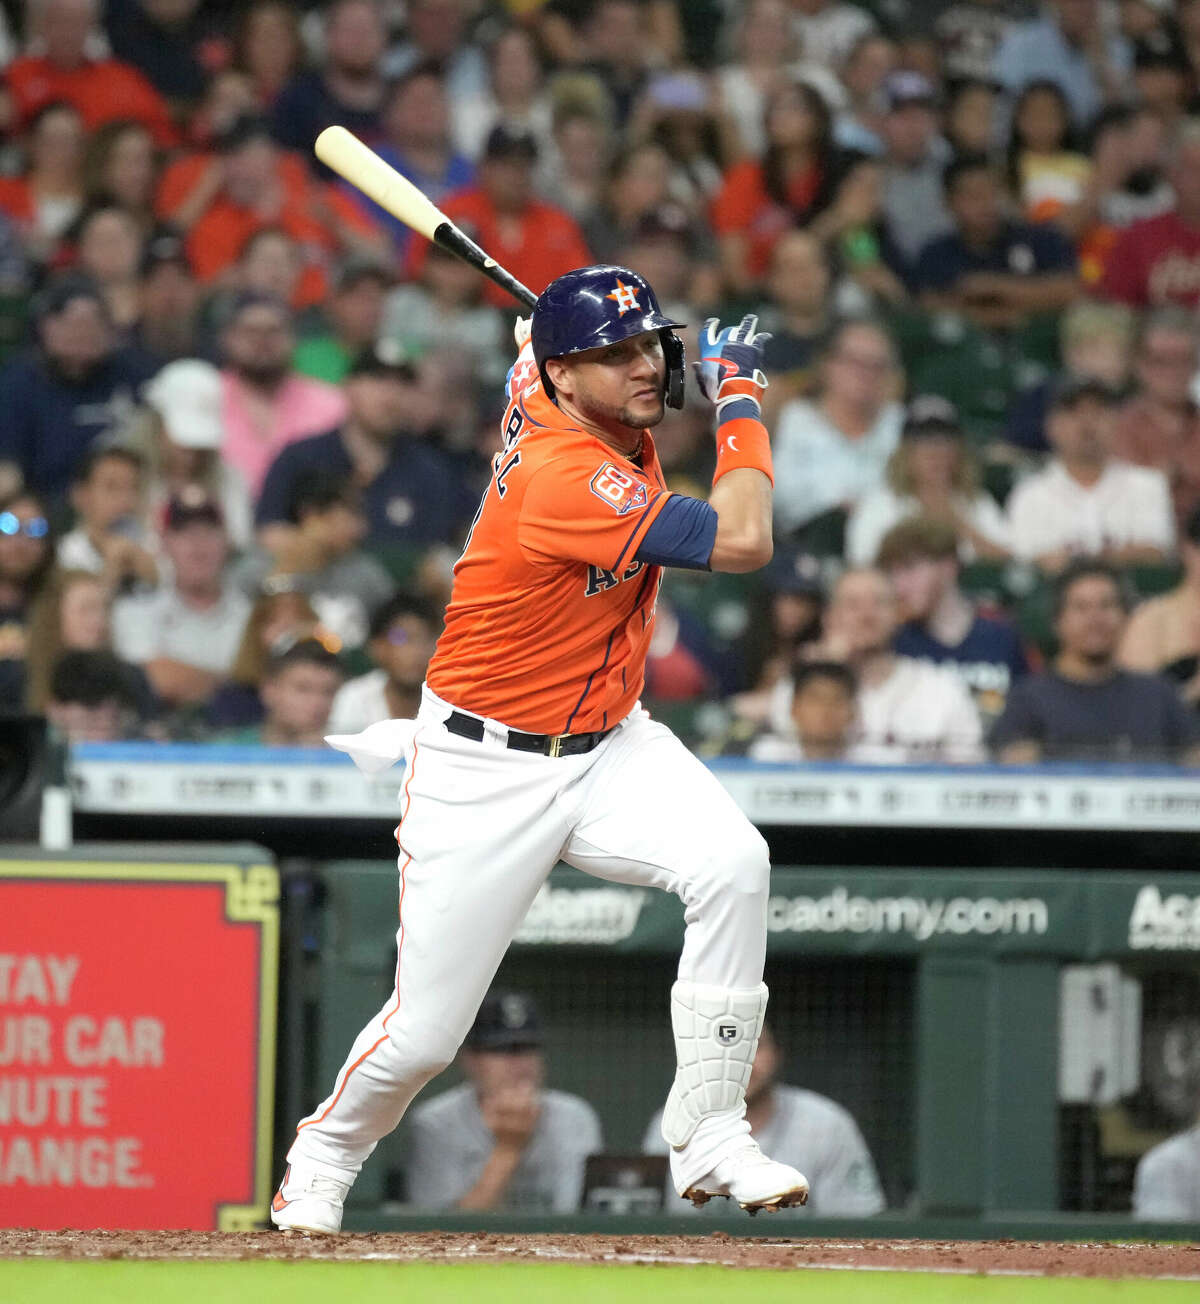 Houston Astros' Yuli Gurriel (10) singles off of Seattle Mariners starting pitcher Robbie Ray (38) during the third inning of an MLB baseball game at Minute Maid Park on Friday, July 29, 2022 in Houston.